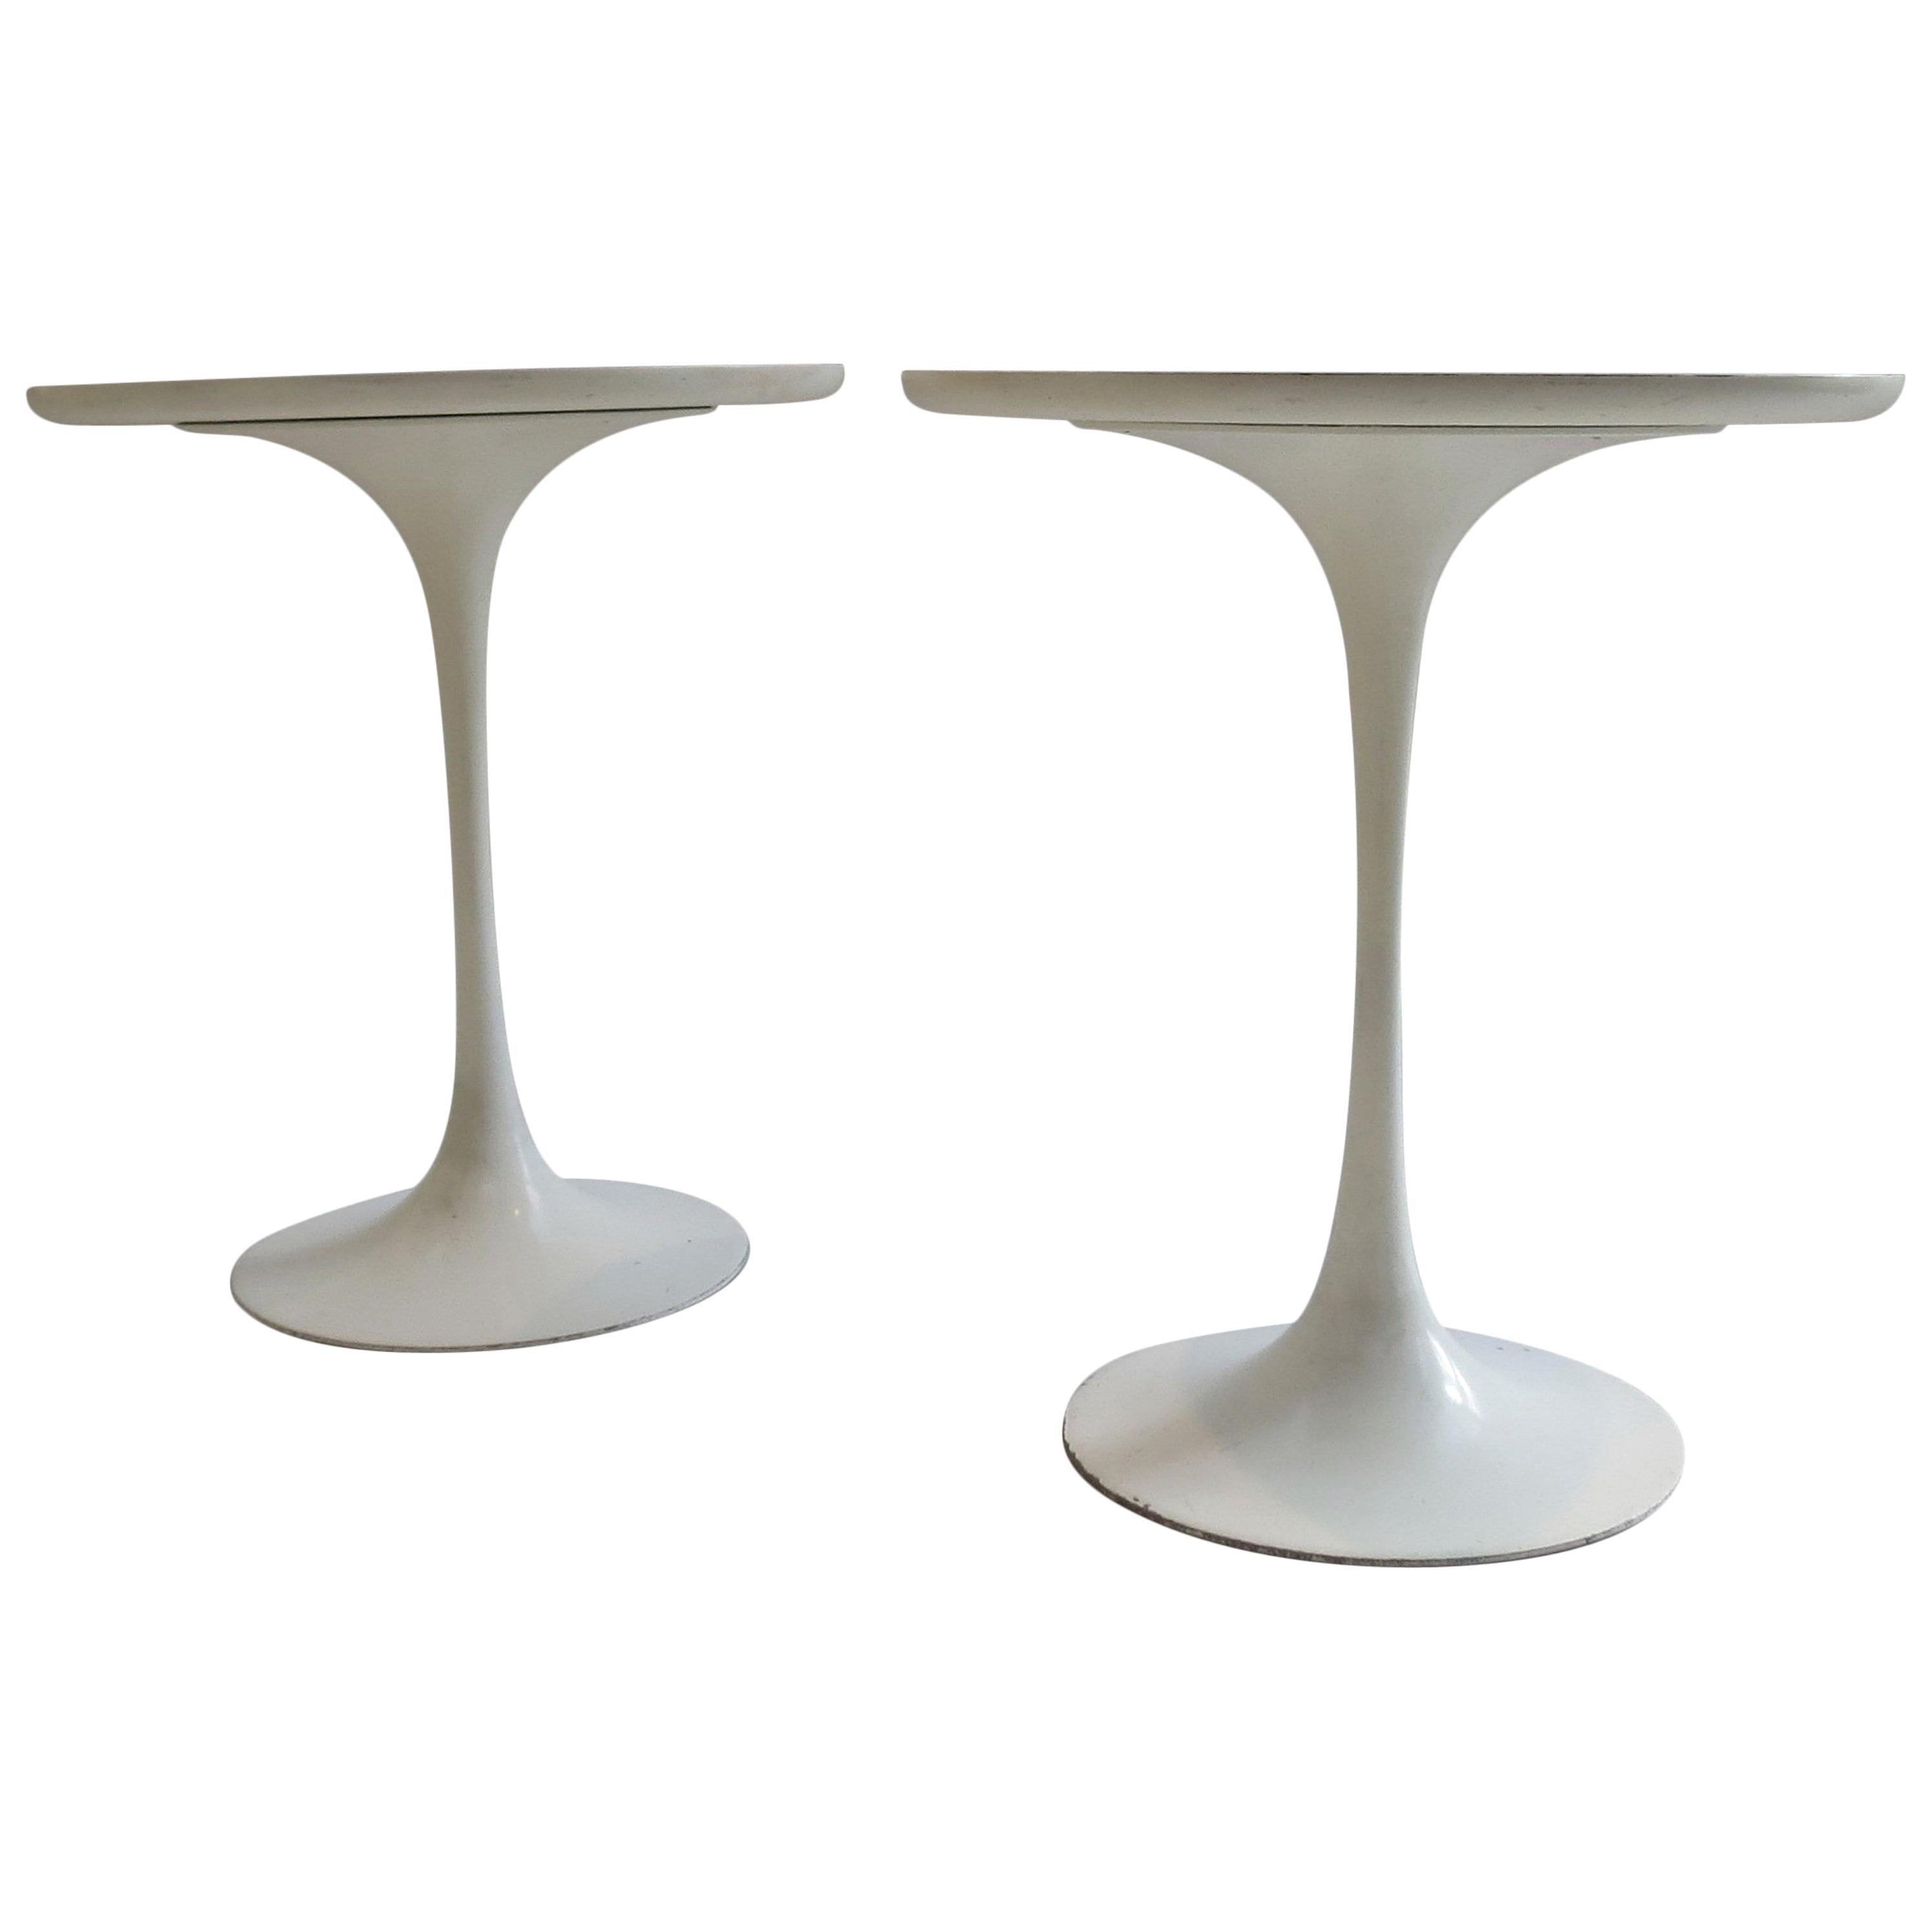 Pair of 1960s Tulip Side Tables Designed by Maurice Burke for Arkana